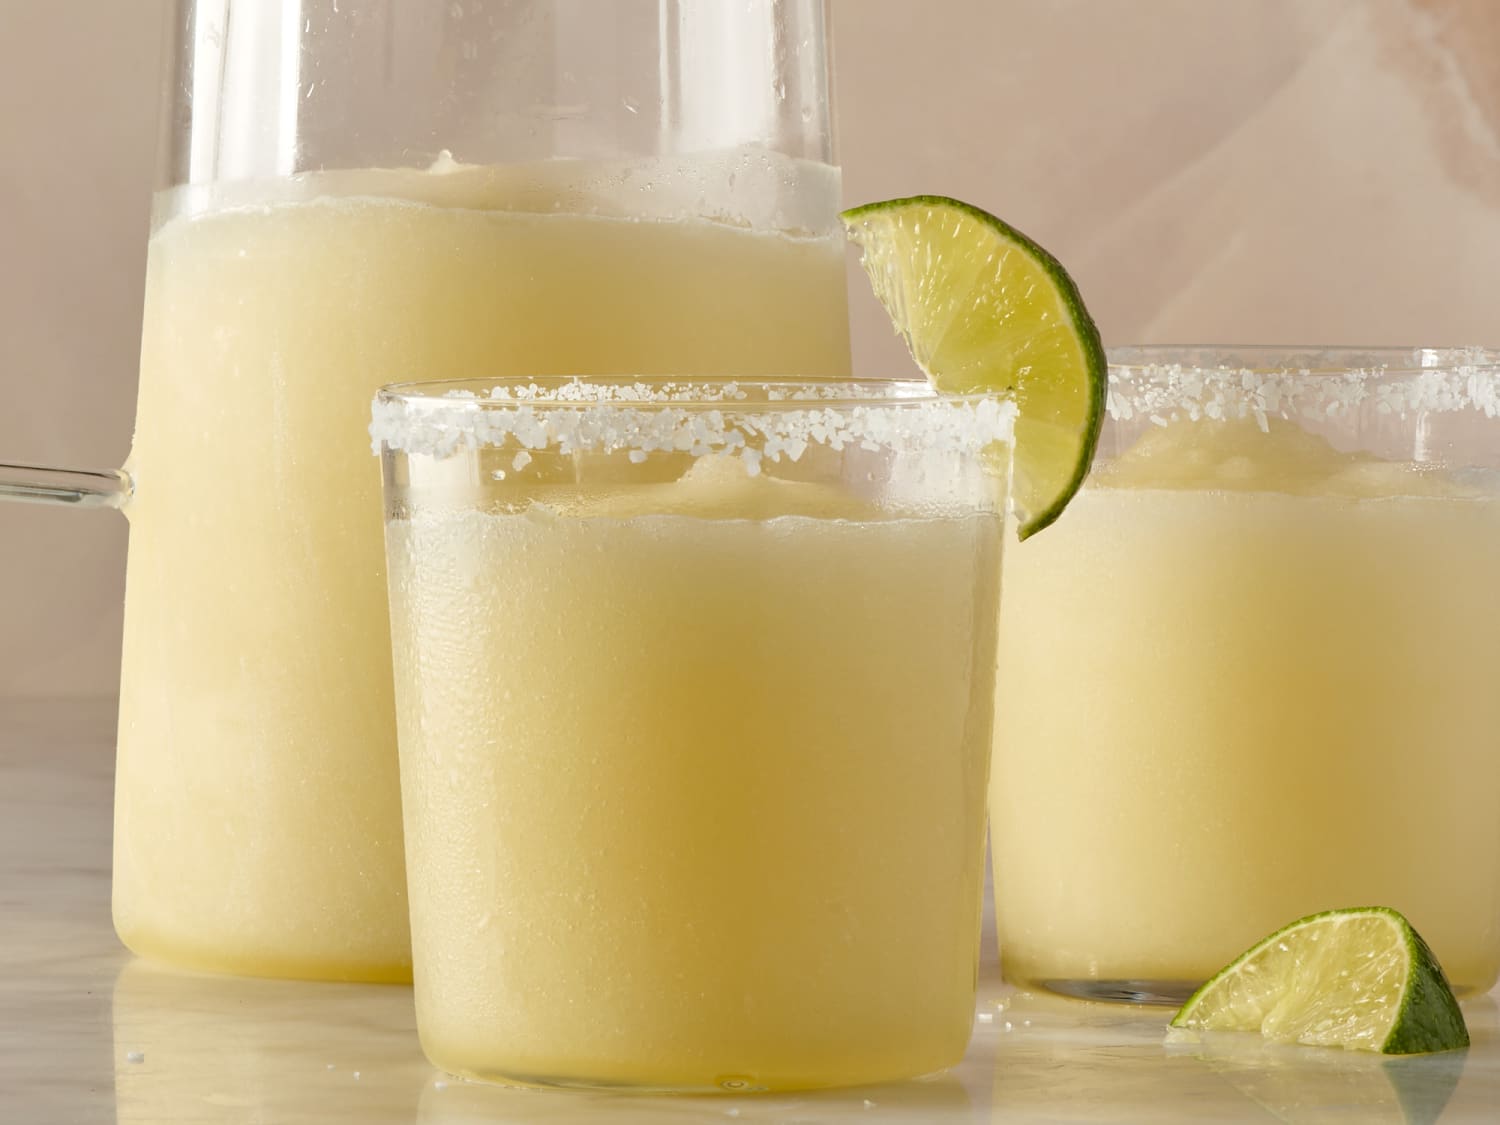 The Best Blenders Will Help You Eat More Vegetables and Drink More  Margaritas